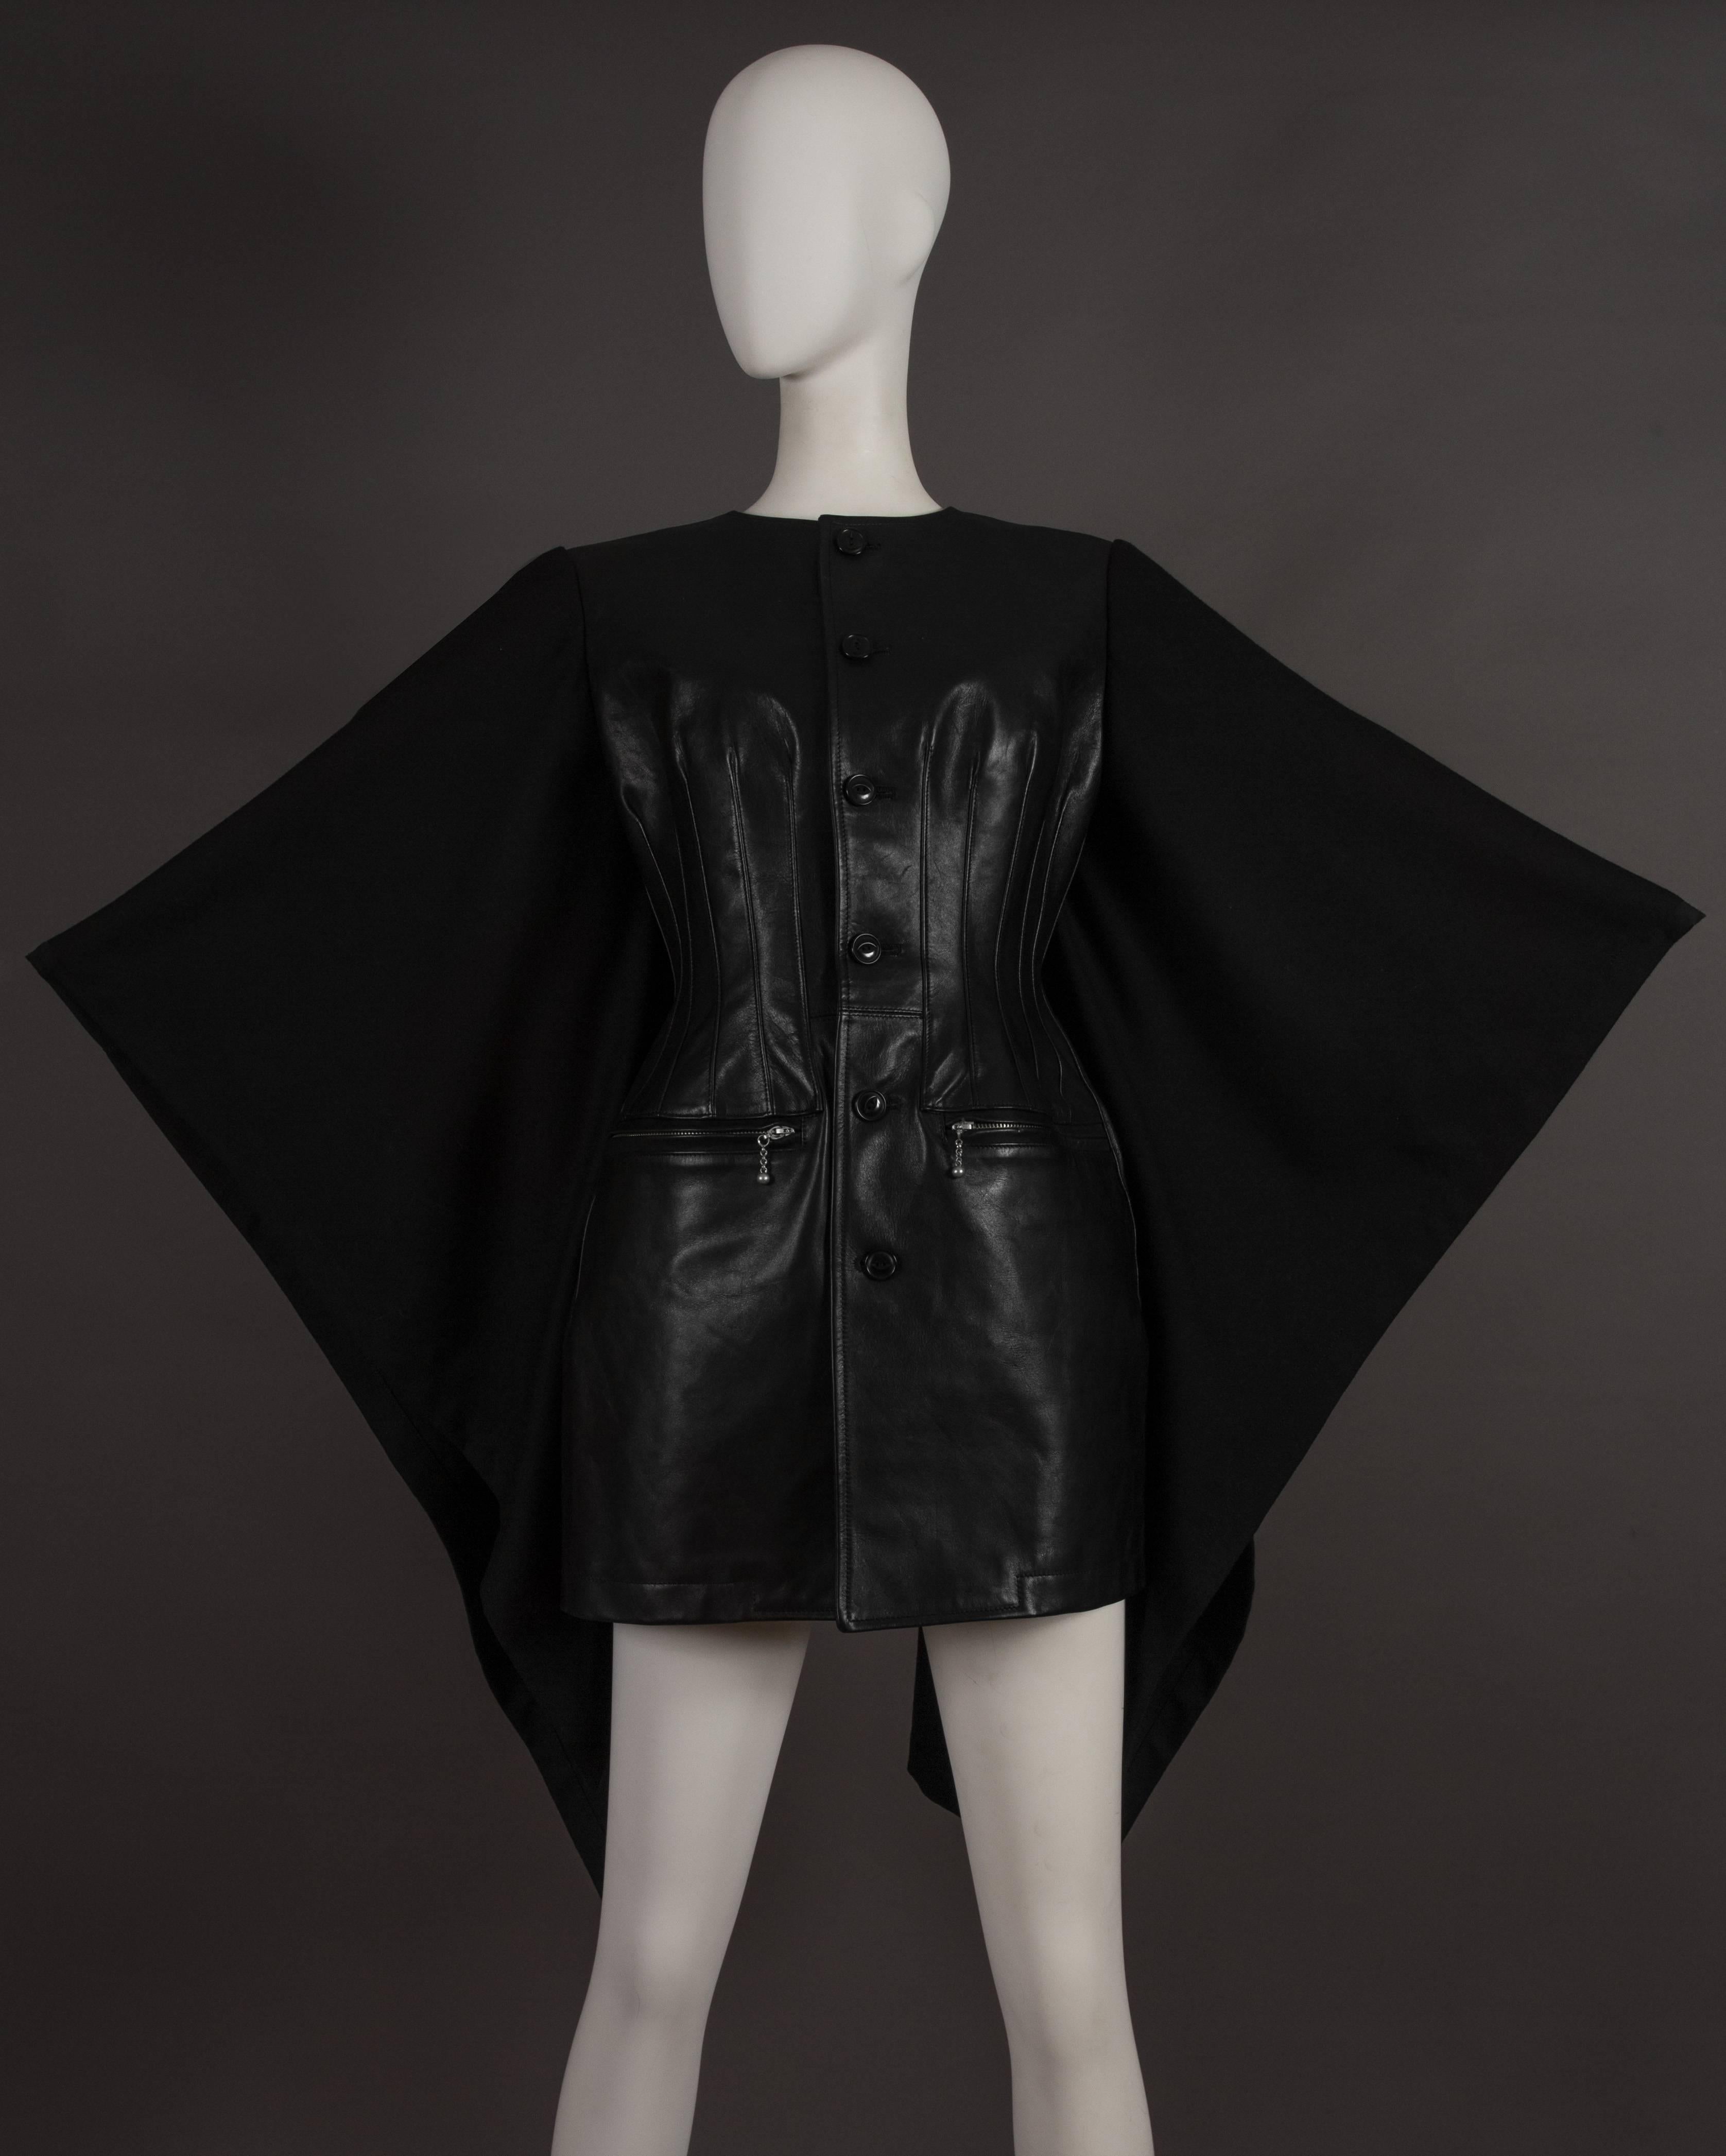 Rare Junya Watanabe COMME des GARCONS black leather jacket with attached wool cape. The jacket features a moulded leather bust with button fastenings, two zipped front pockets and cupro lining. From the autumn-winter 2011 runway collection.